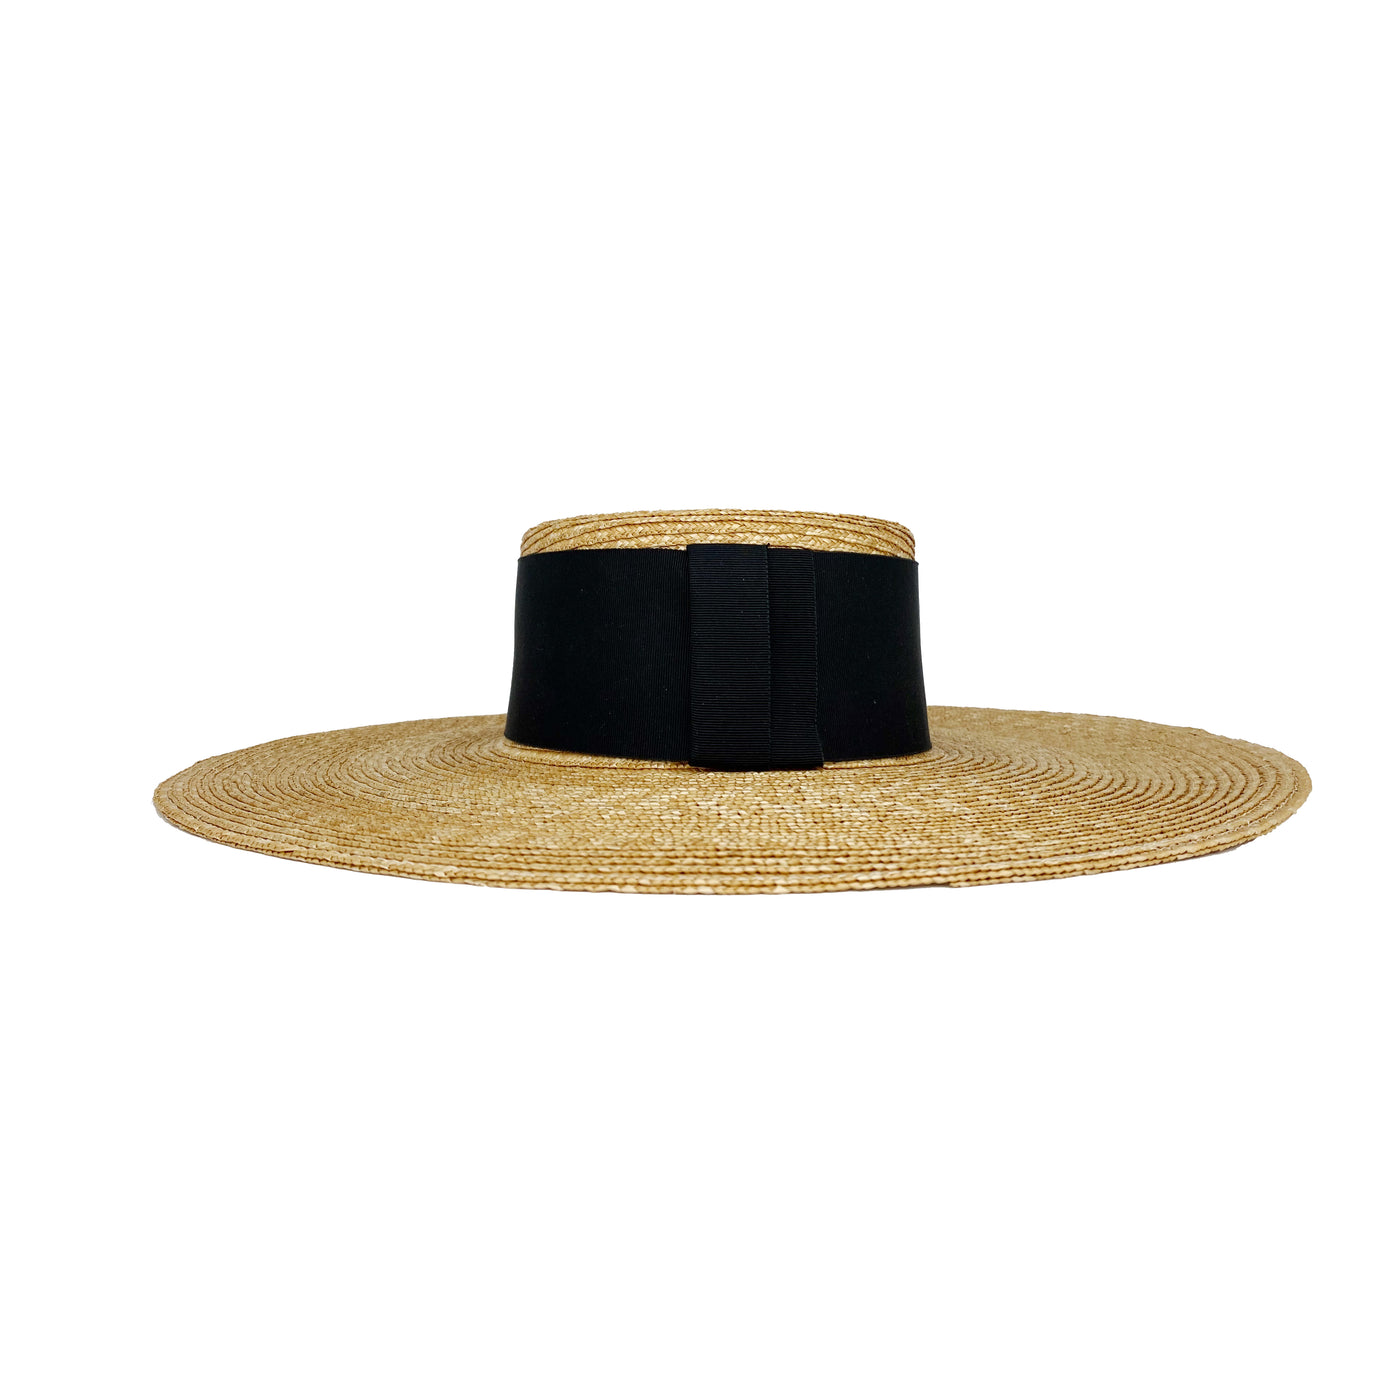 Italian straw boater with wide grosgrain band